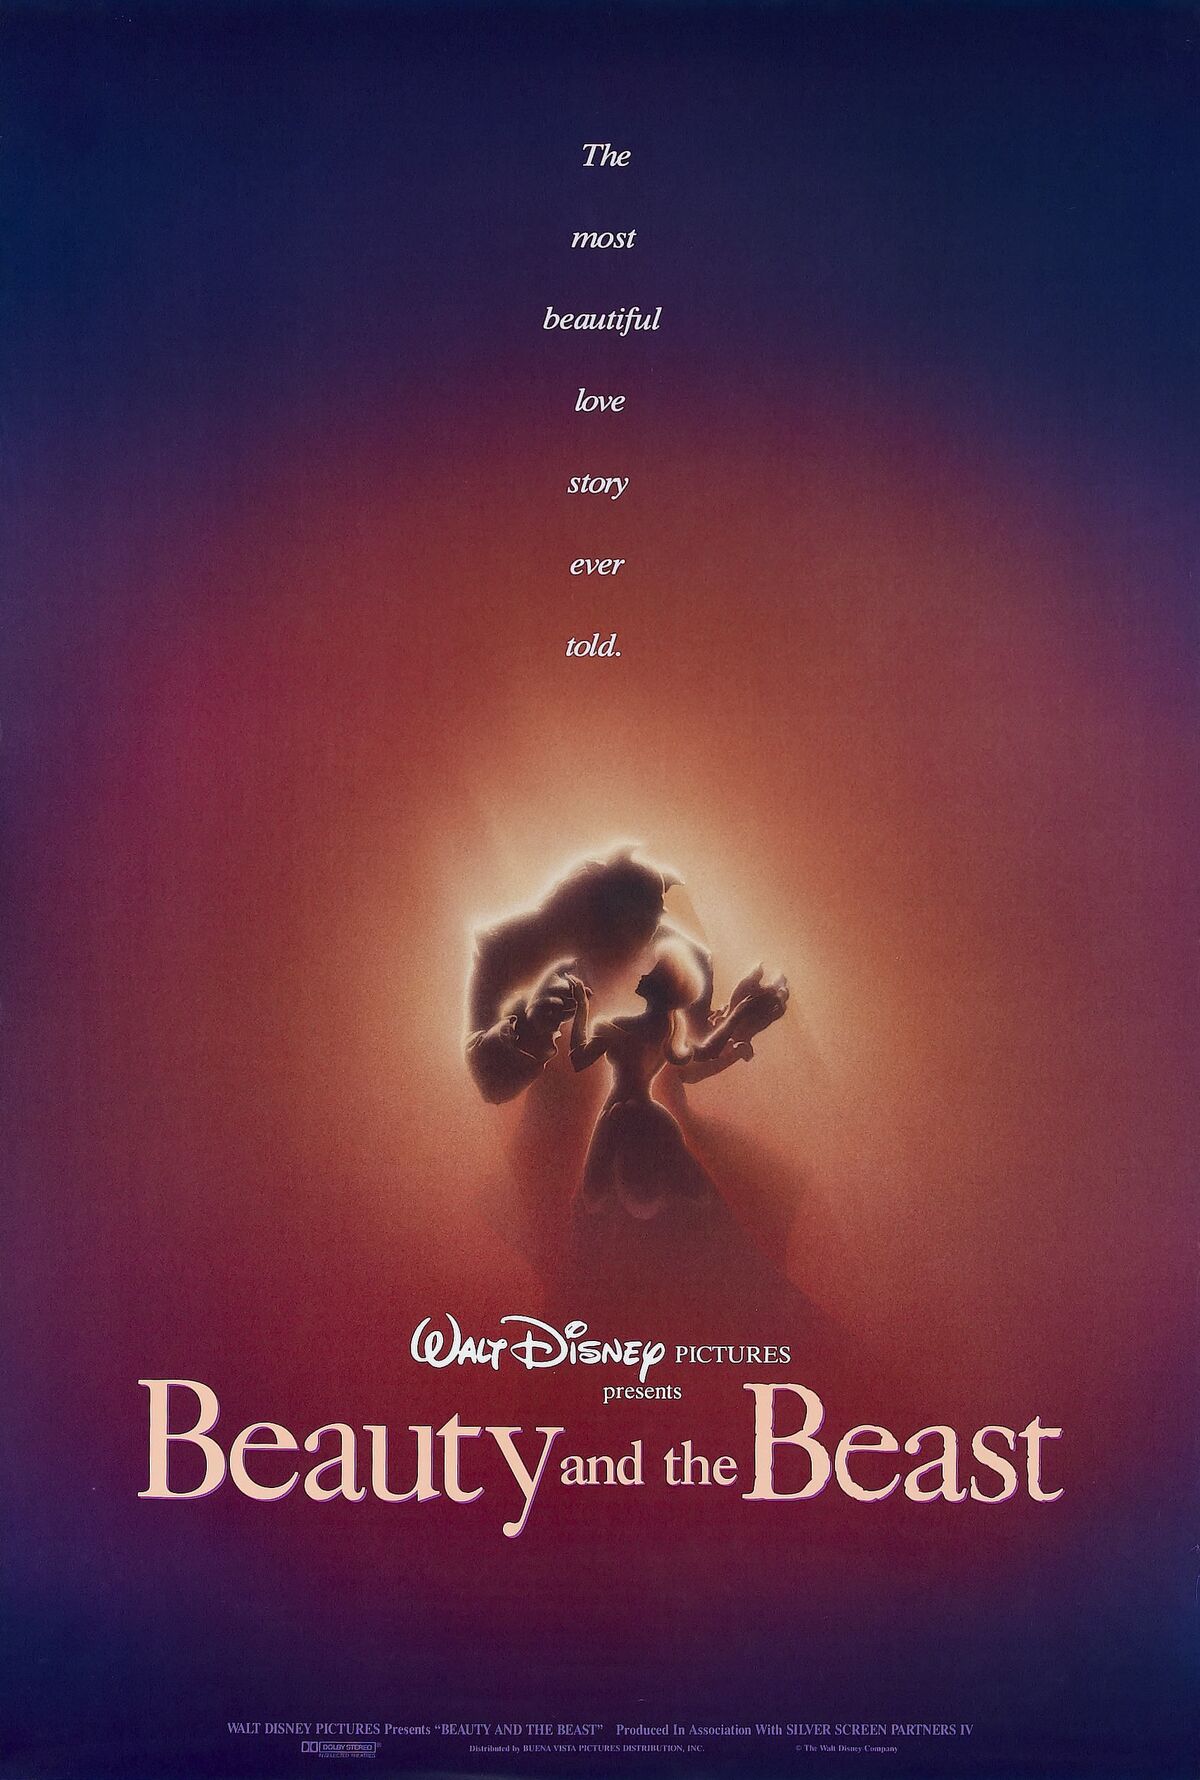 Beauty and the Beast (1991 film) | The JH Movie Collection's